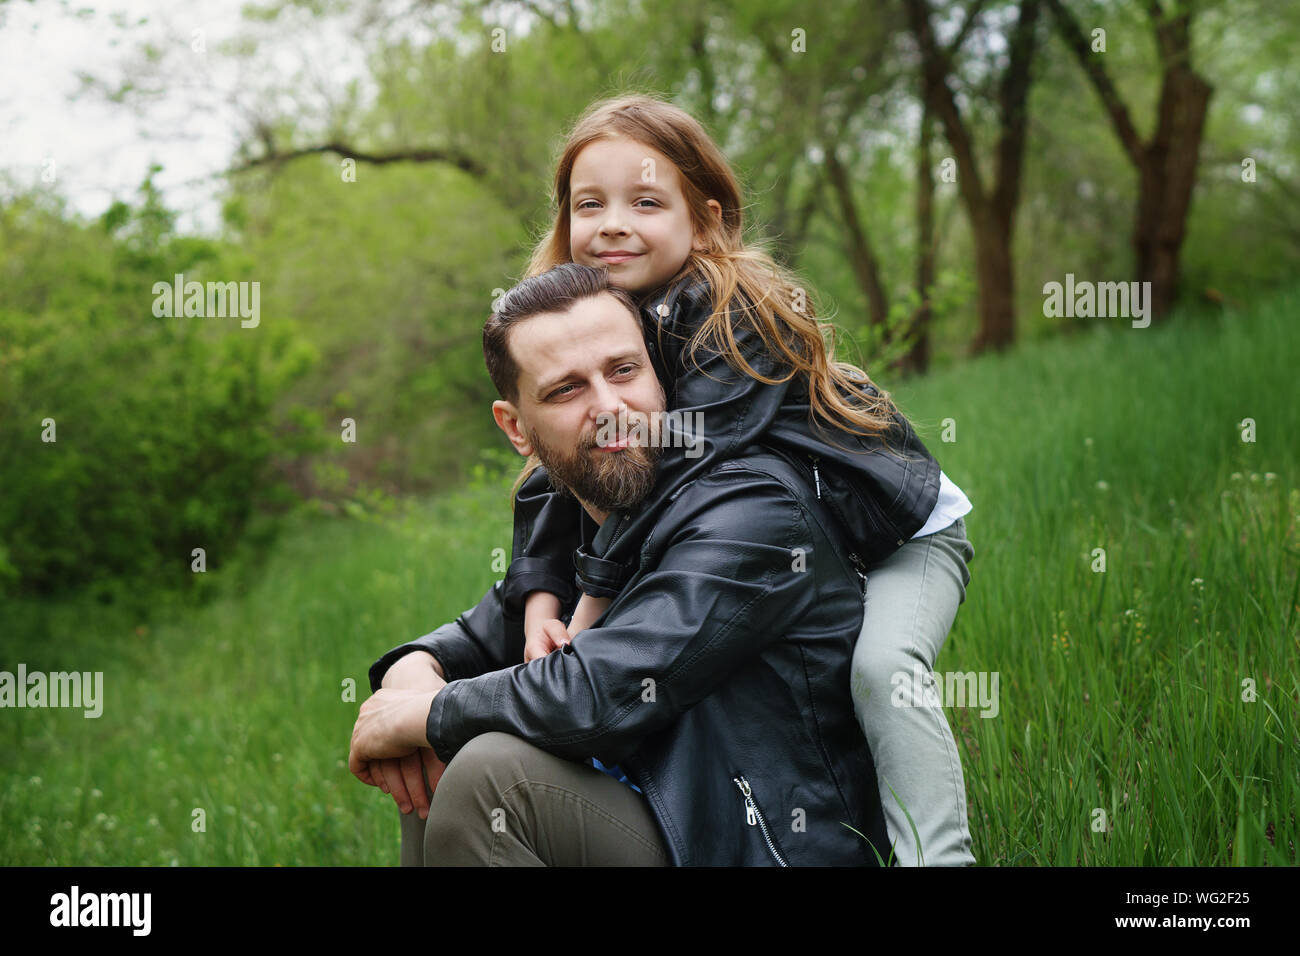 Fashionable happy family walking in the park. Portrait of a loving daughter and a caring father. Time together. Family look. Urban casual outfit. Stock Photo